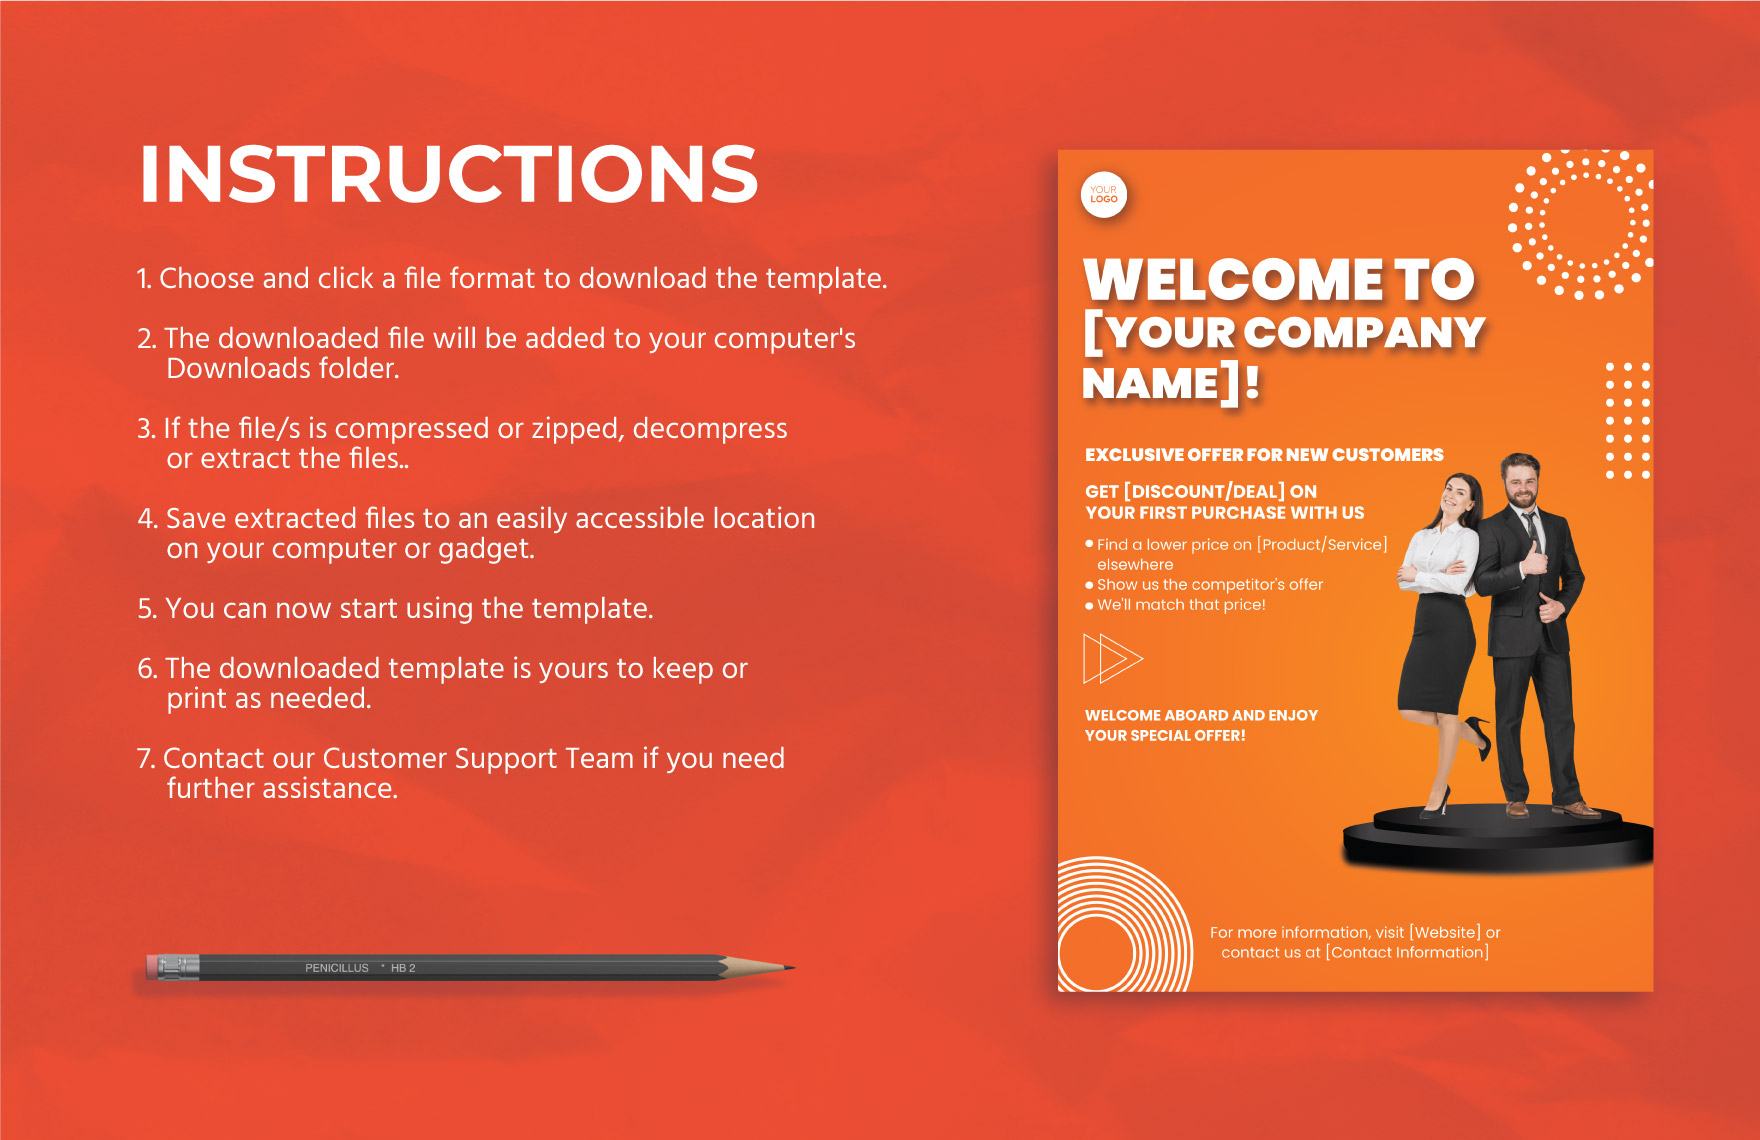 Sales New Customer Welcome Offer Poster Template